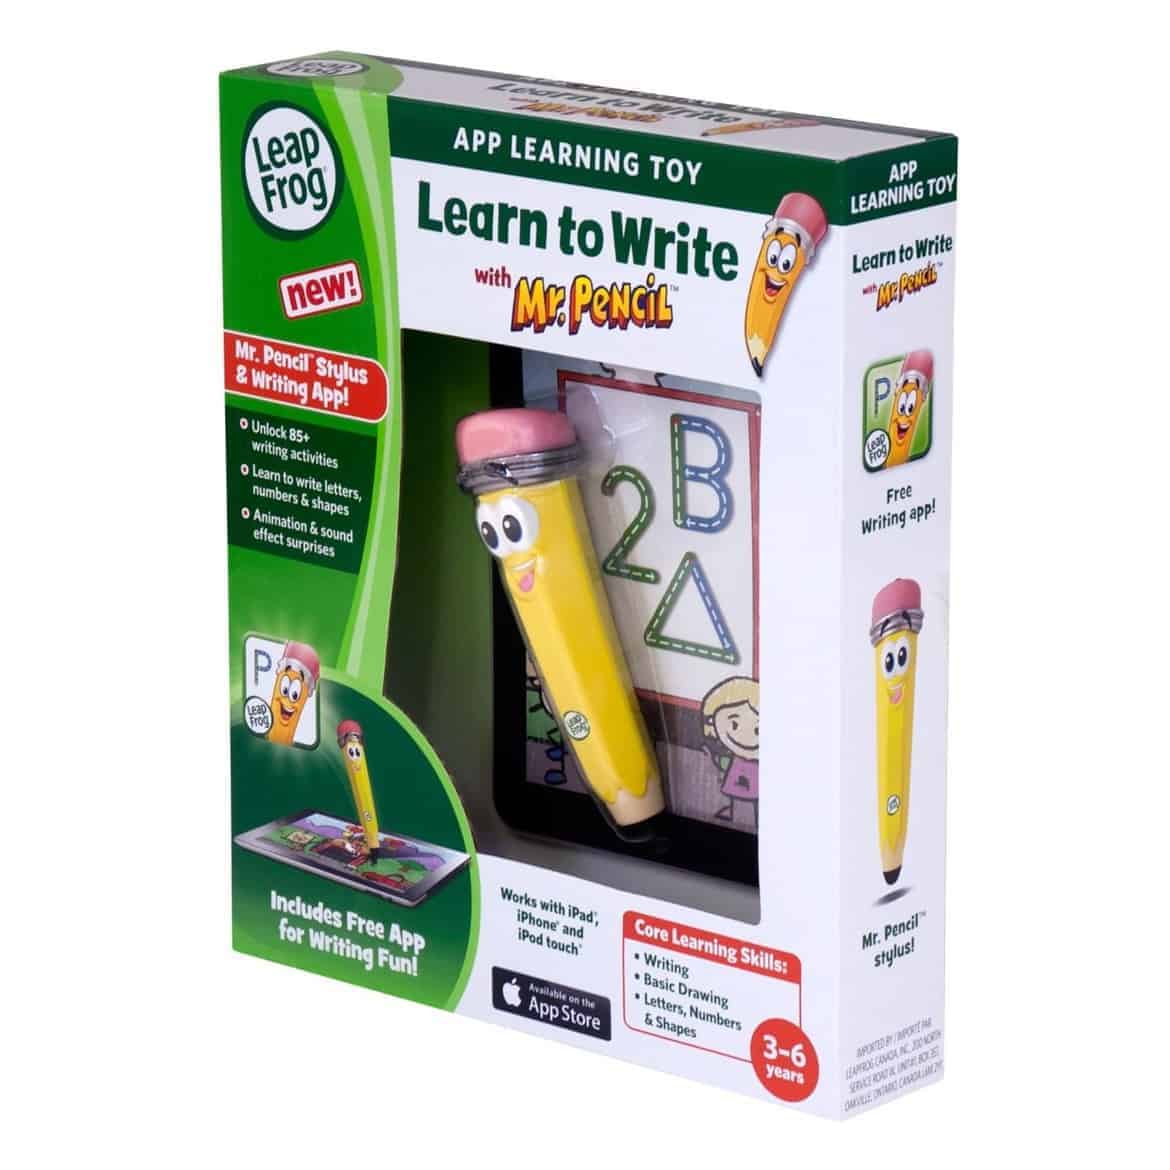 leapfrog_learn_to_write_with_mr._pencil_stylus_writing_app